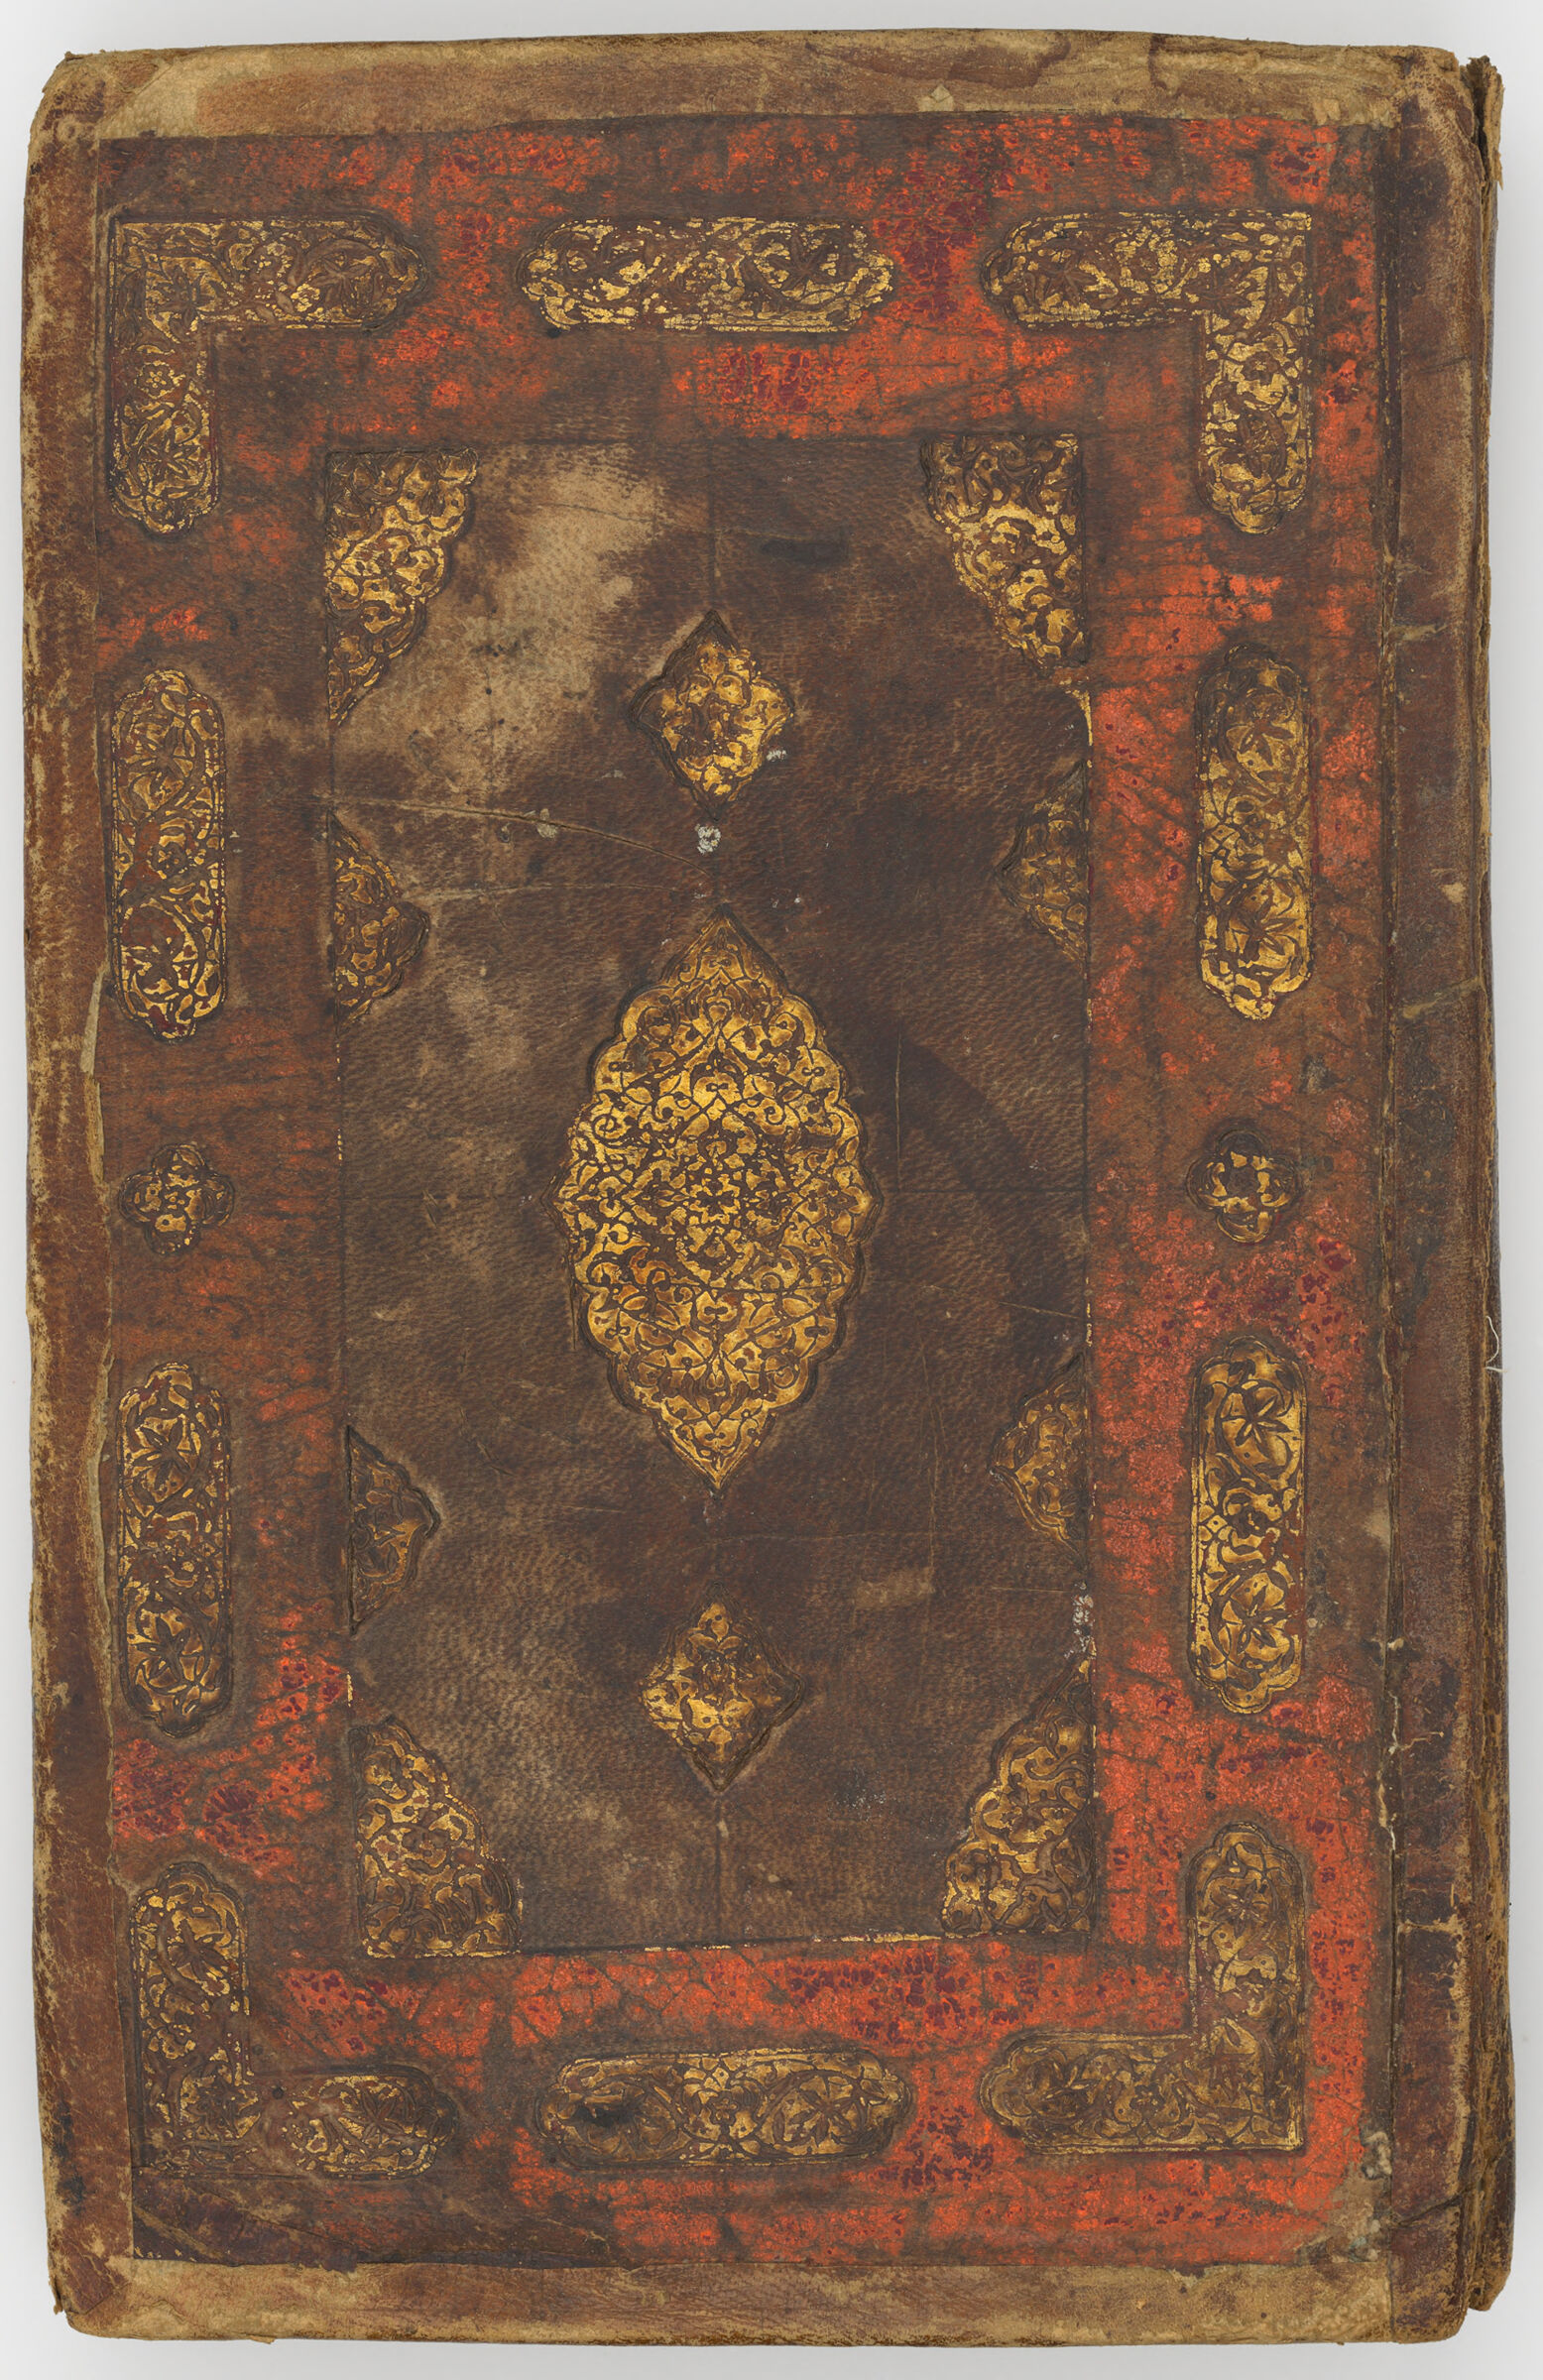 Illustrated Manuscript Of Yusuf And Zulaykha By Jami